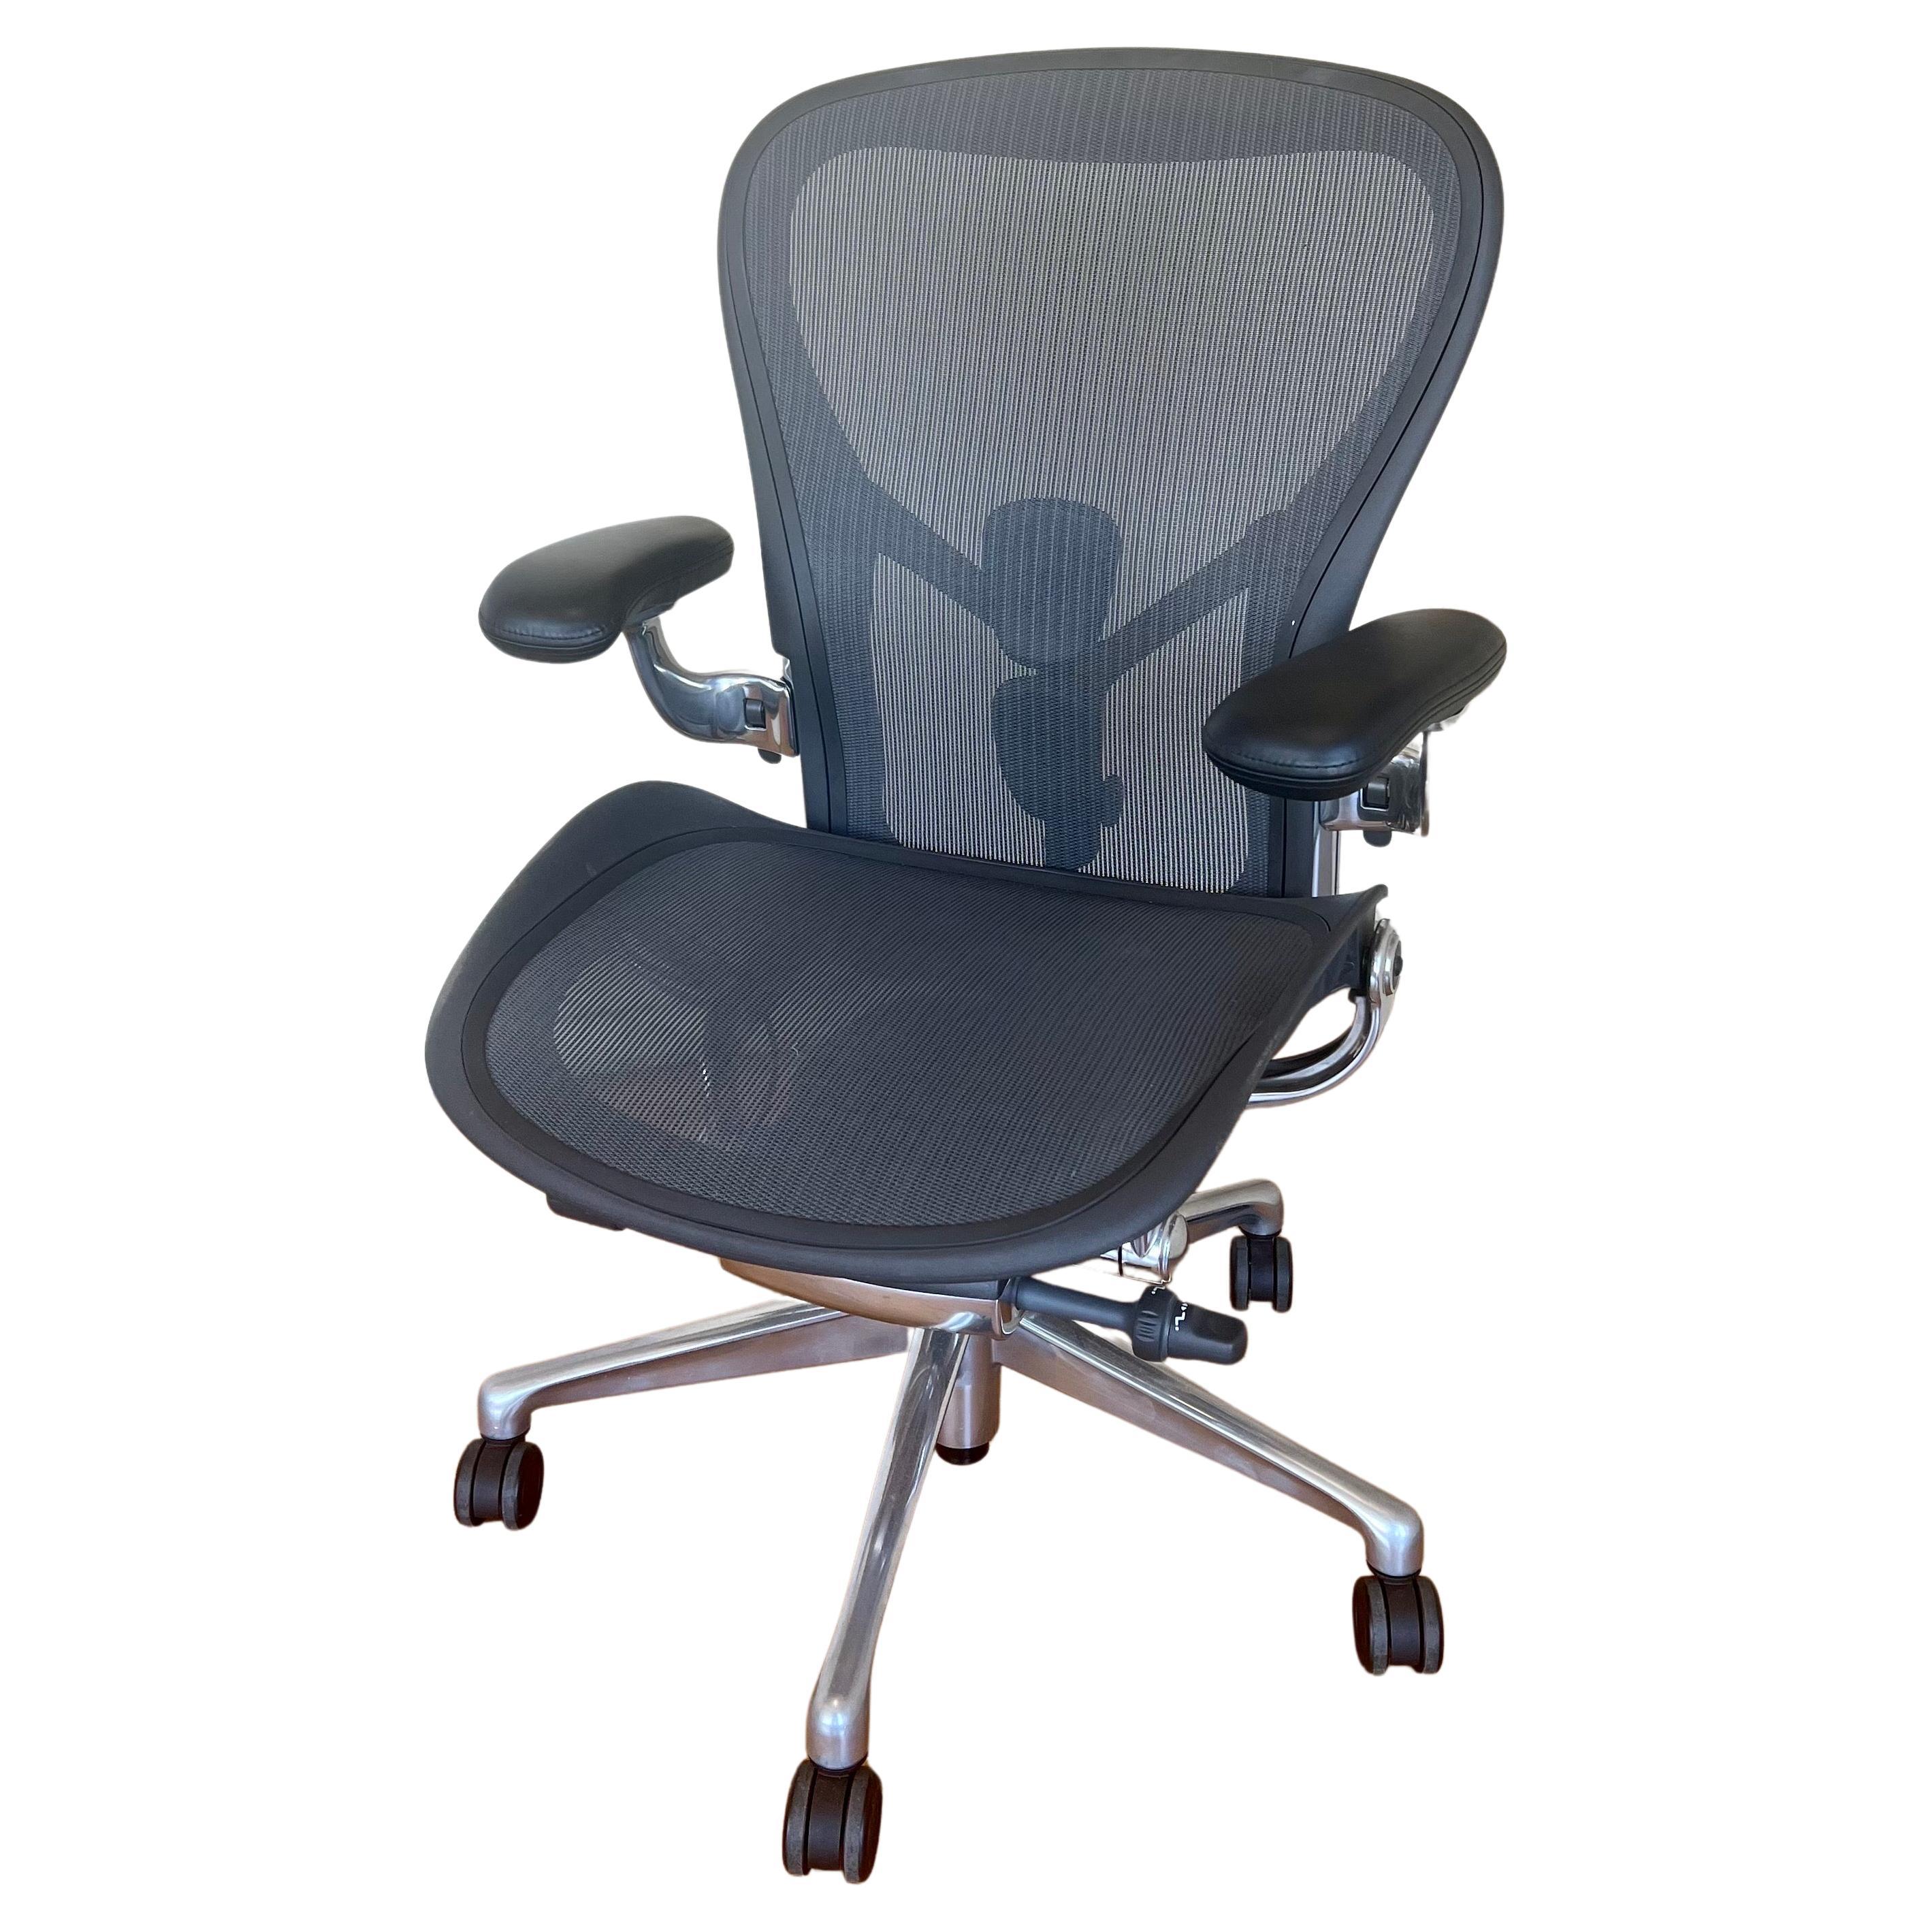 Stunning executive desk chair in excellent condition the Ferrari of all desk chairs, very clean and in nice condition made by Herman Miller these are the largest size, size C, with aluminum frames. These chairs retail for $2700 each.